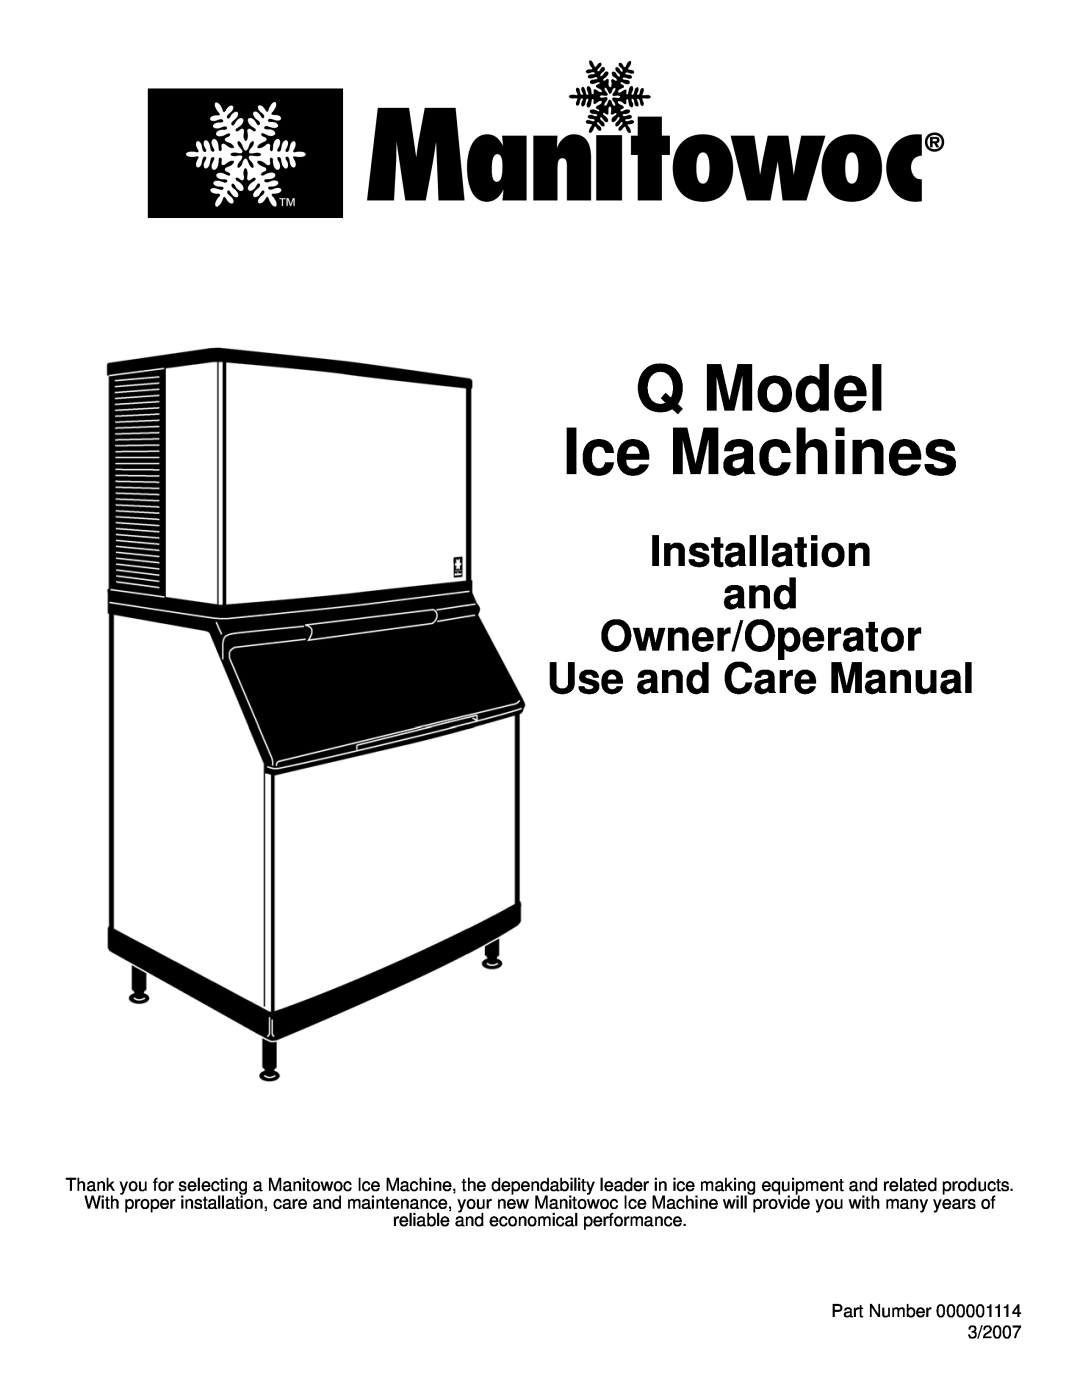 Manitowoc Ice specifications Automatic Cleaning System Installation, Use and Care Manual, Q Model AuCSA Accessory 